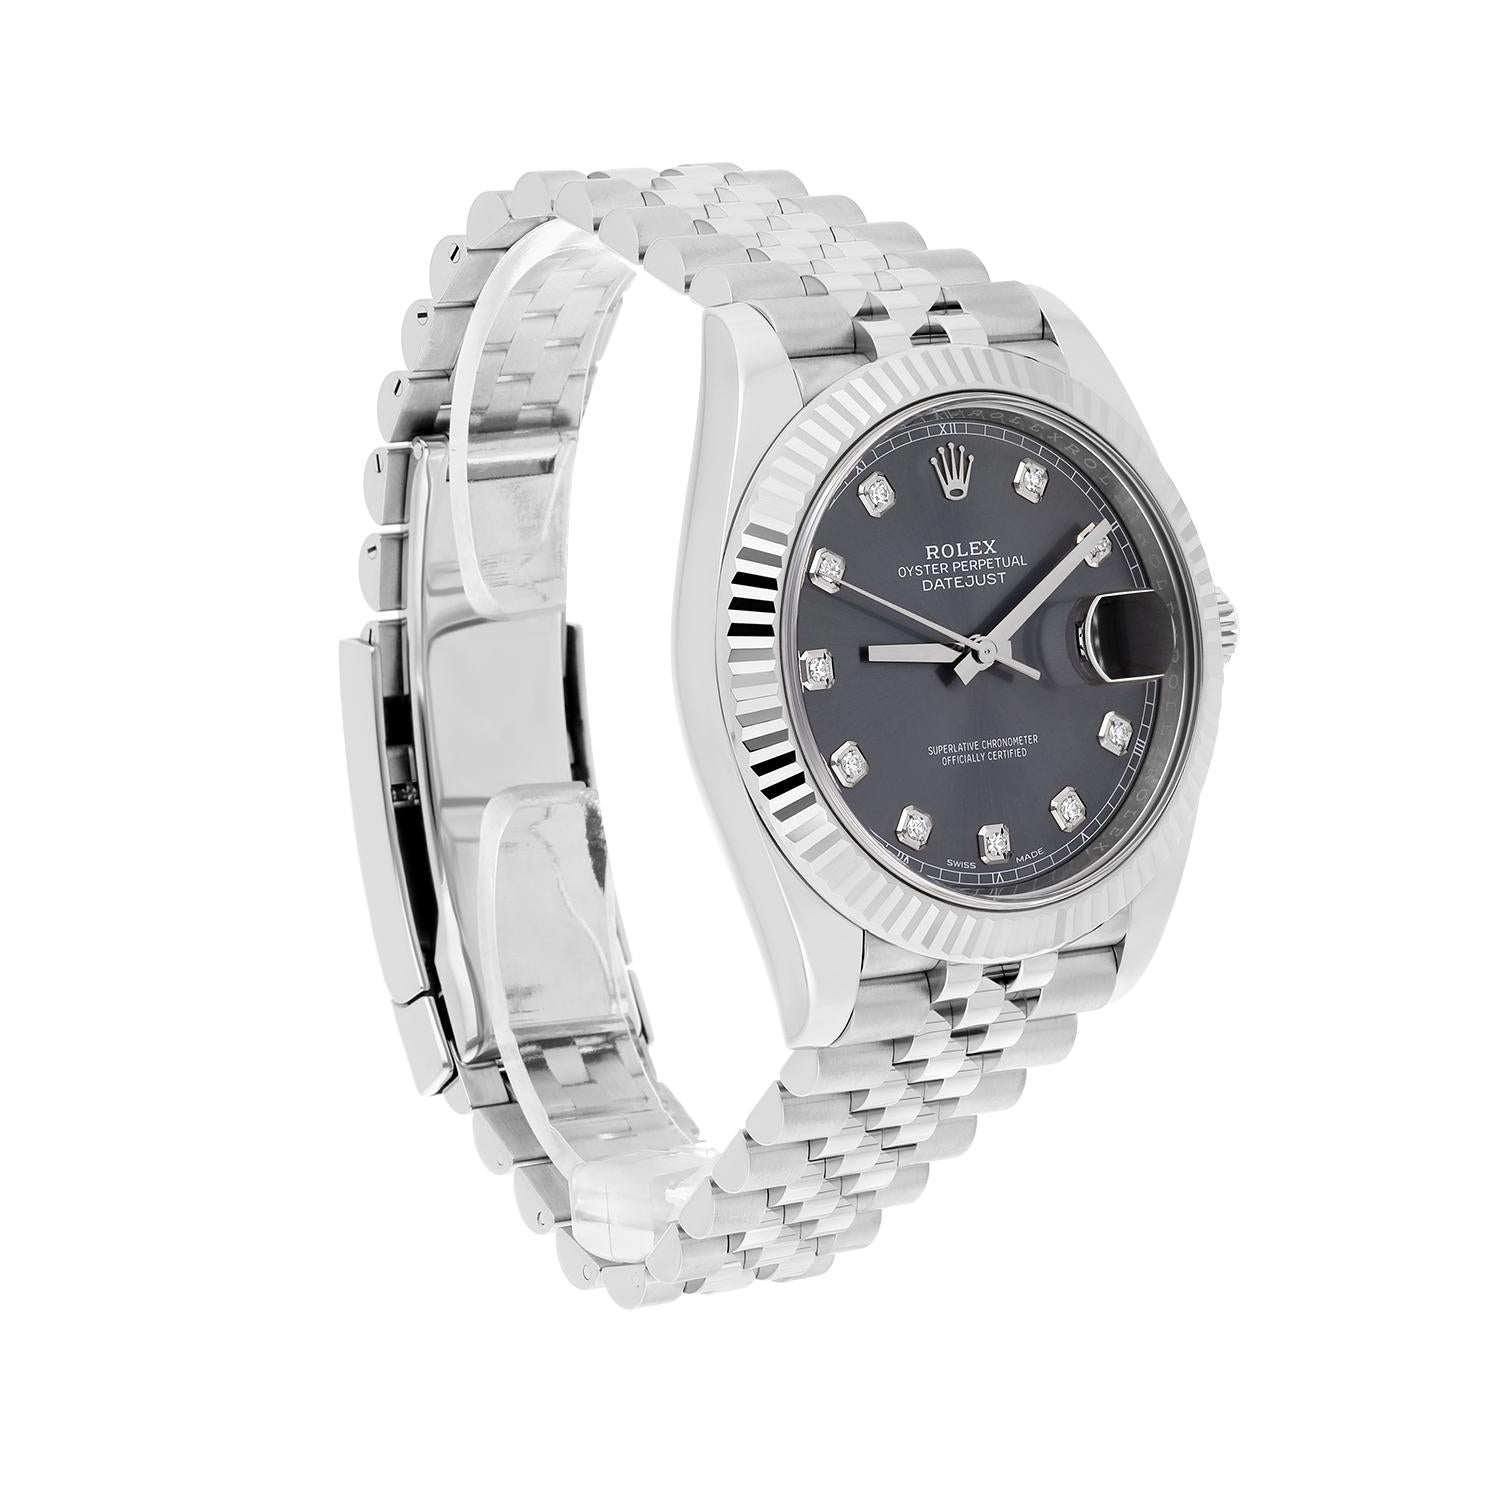 Rolex Datejust 41mm Jubilee Stainless Steel Watch Rhodium Diamond Dial 126334 For Sale 4